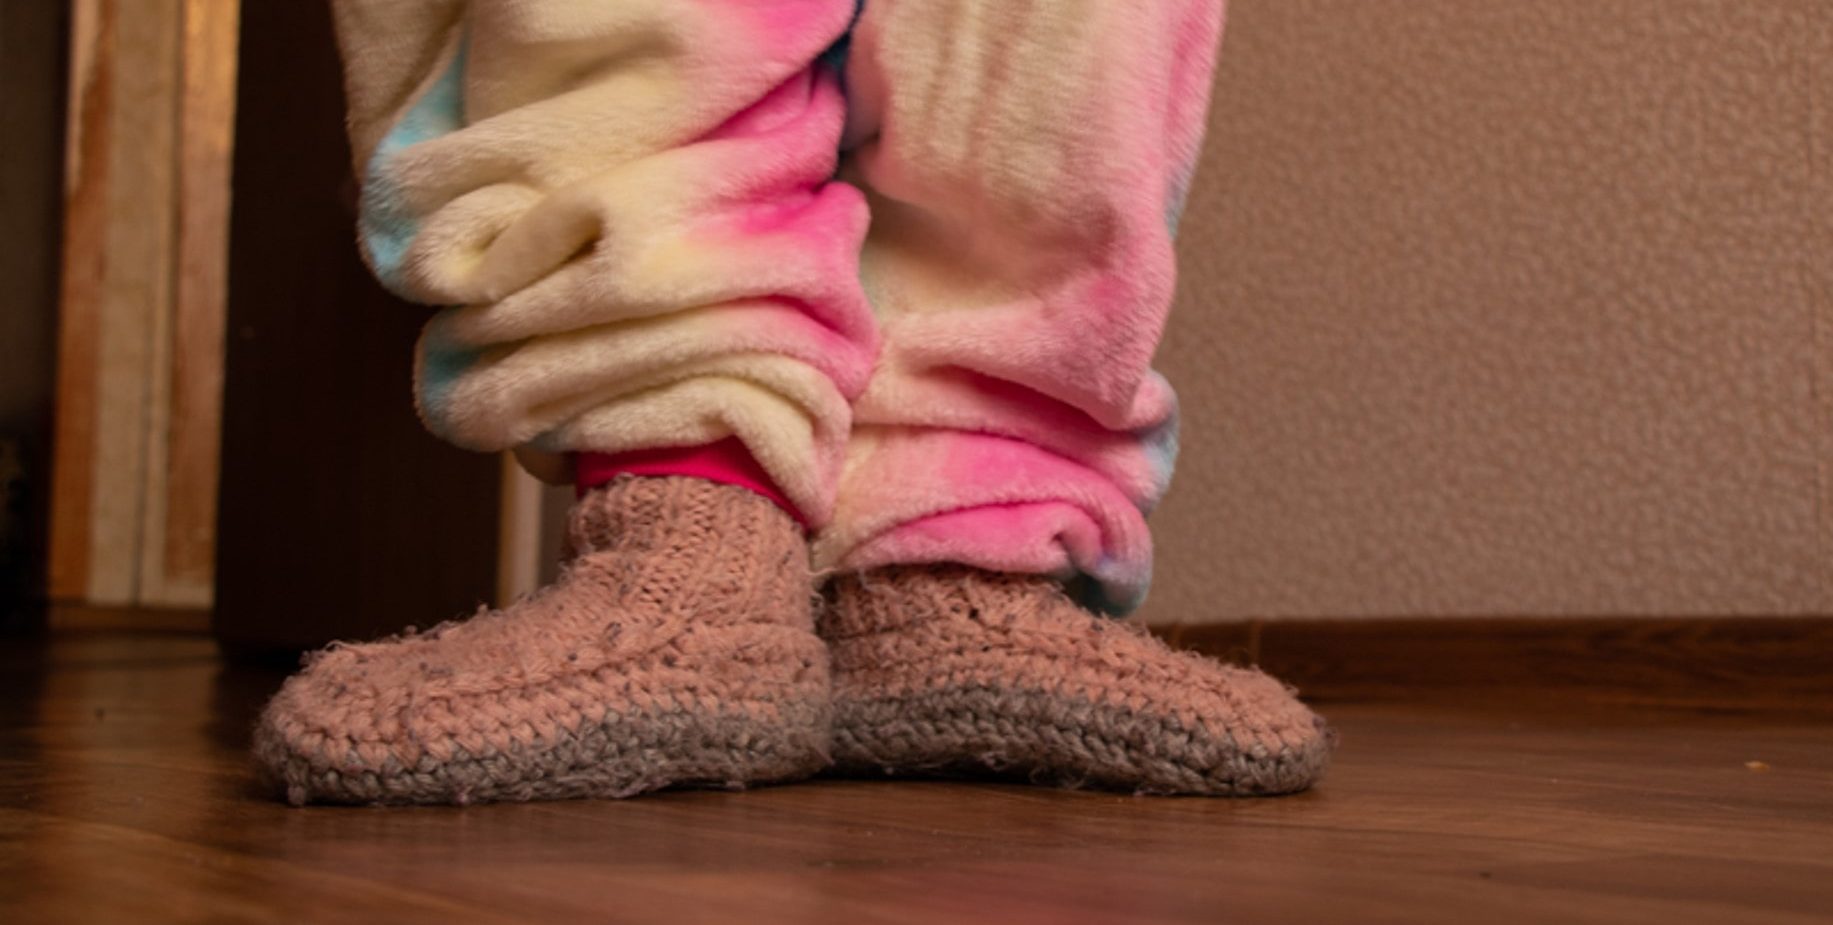 My wooden floors are so COLD. How can I stop cold air coming through my floor?